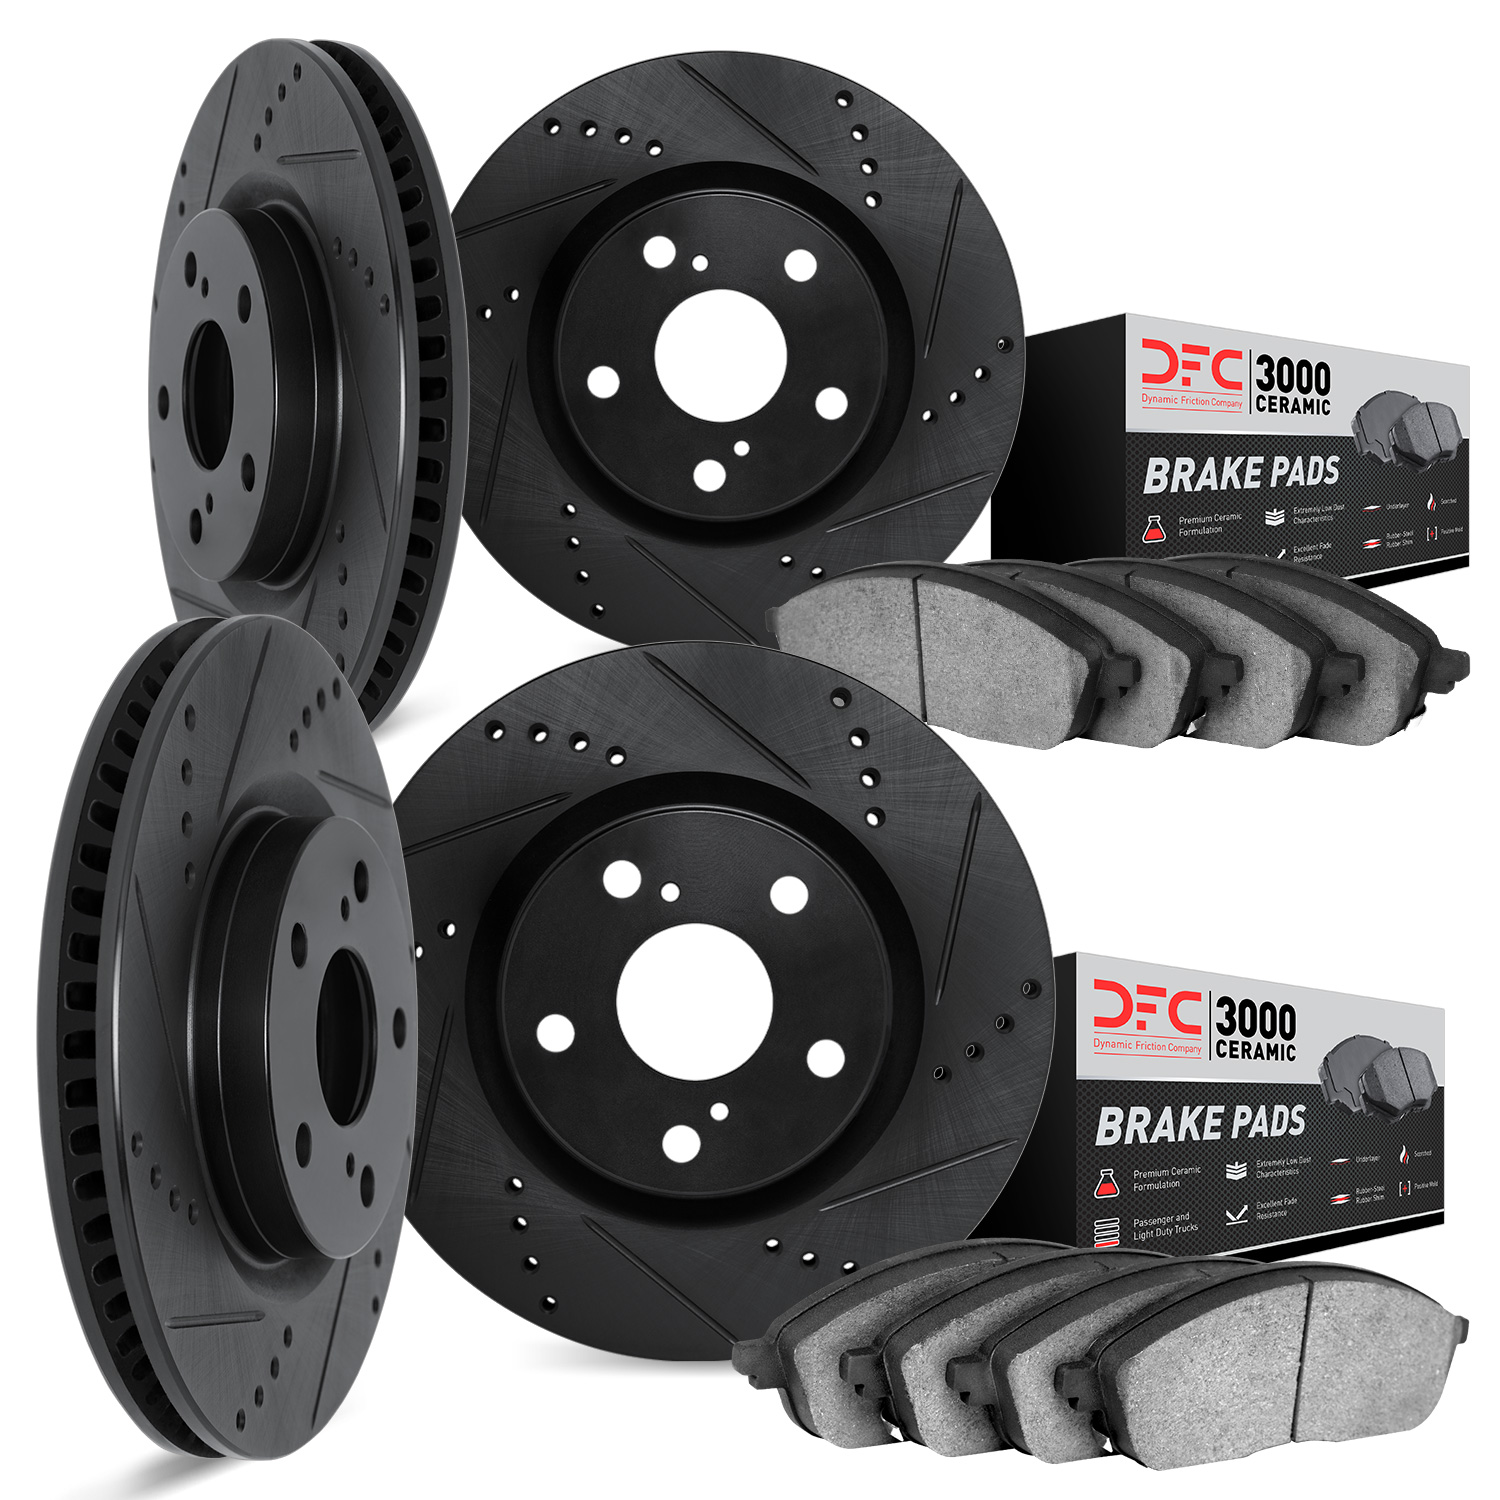 8304-31066 Drilled/Slotted Brake Rotors with 3000-Series Ceramic Brake Pads Kit [Black], 2007-2013 BMW, Position: Front and Rear